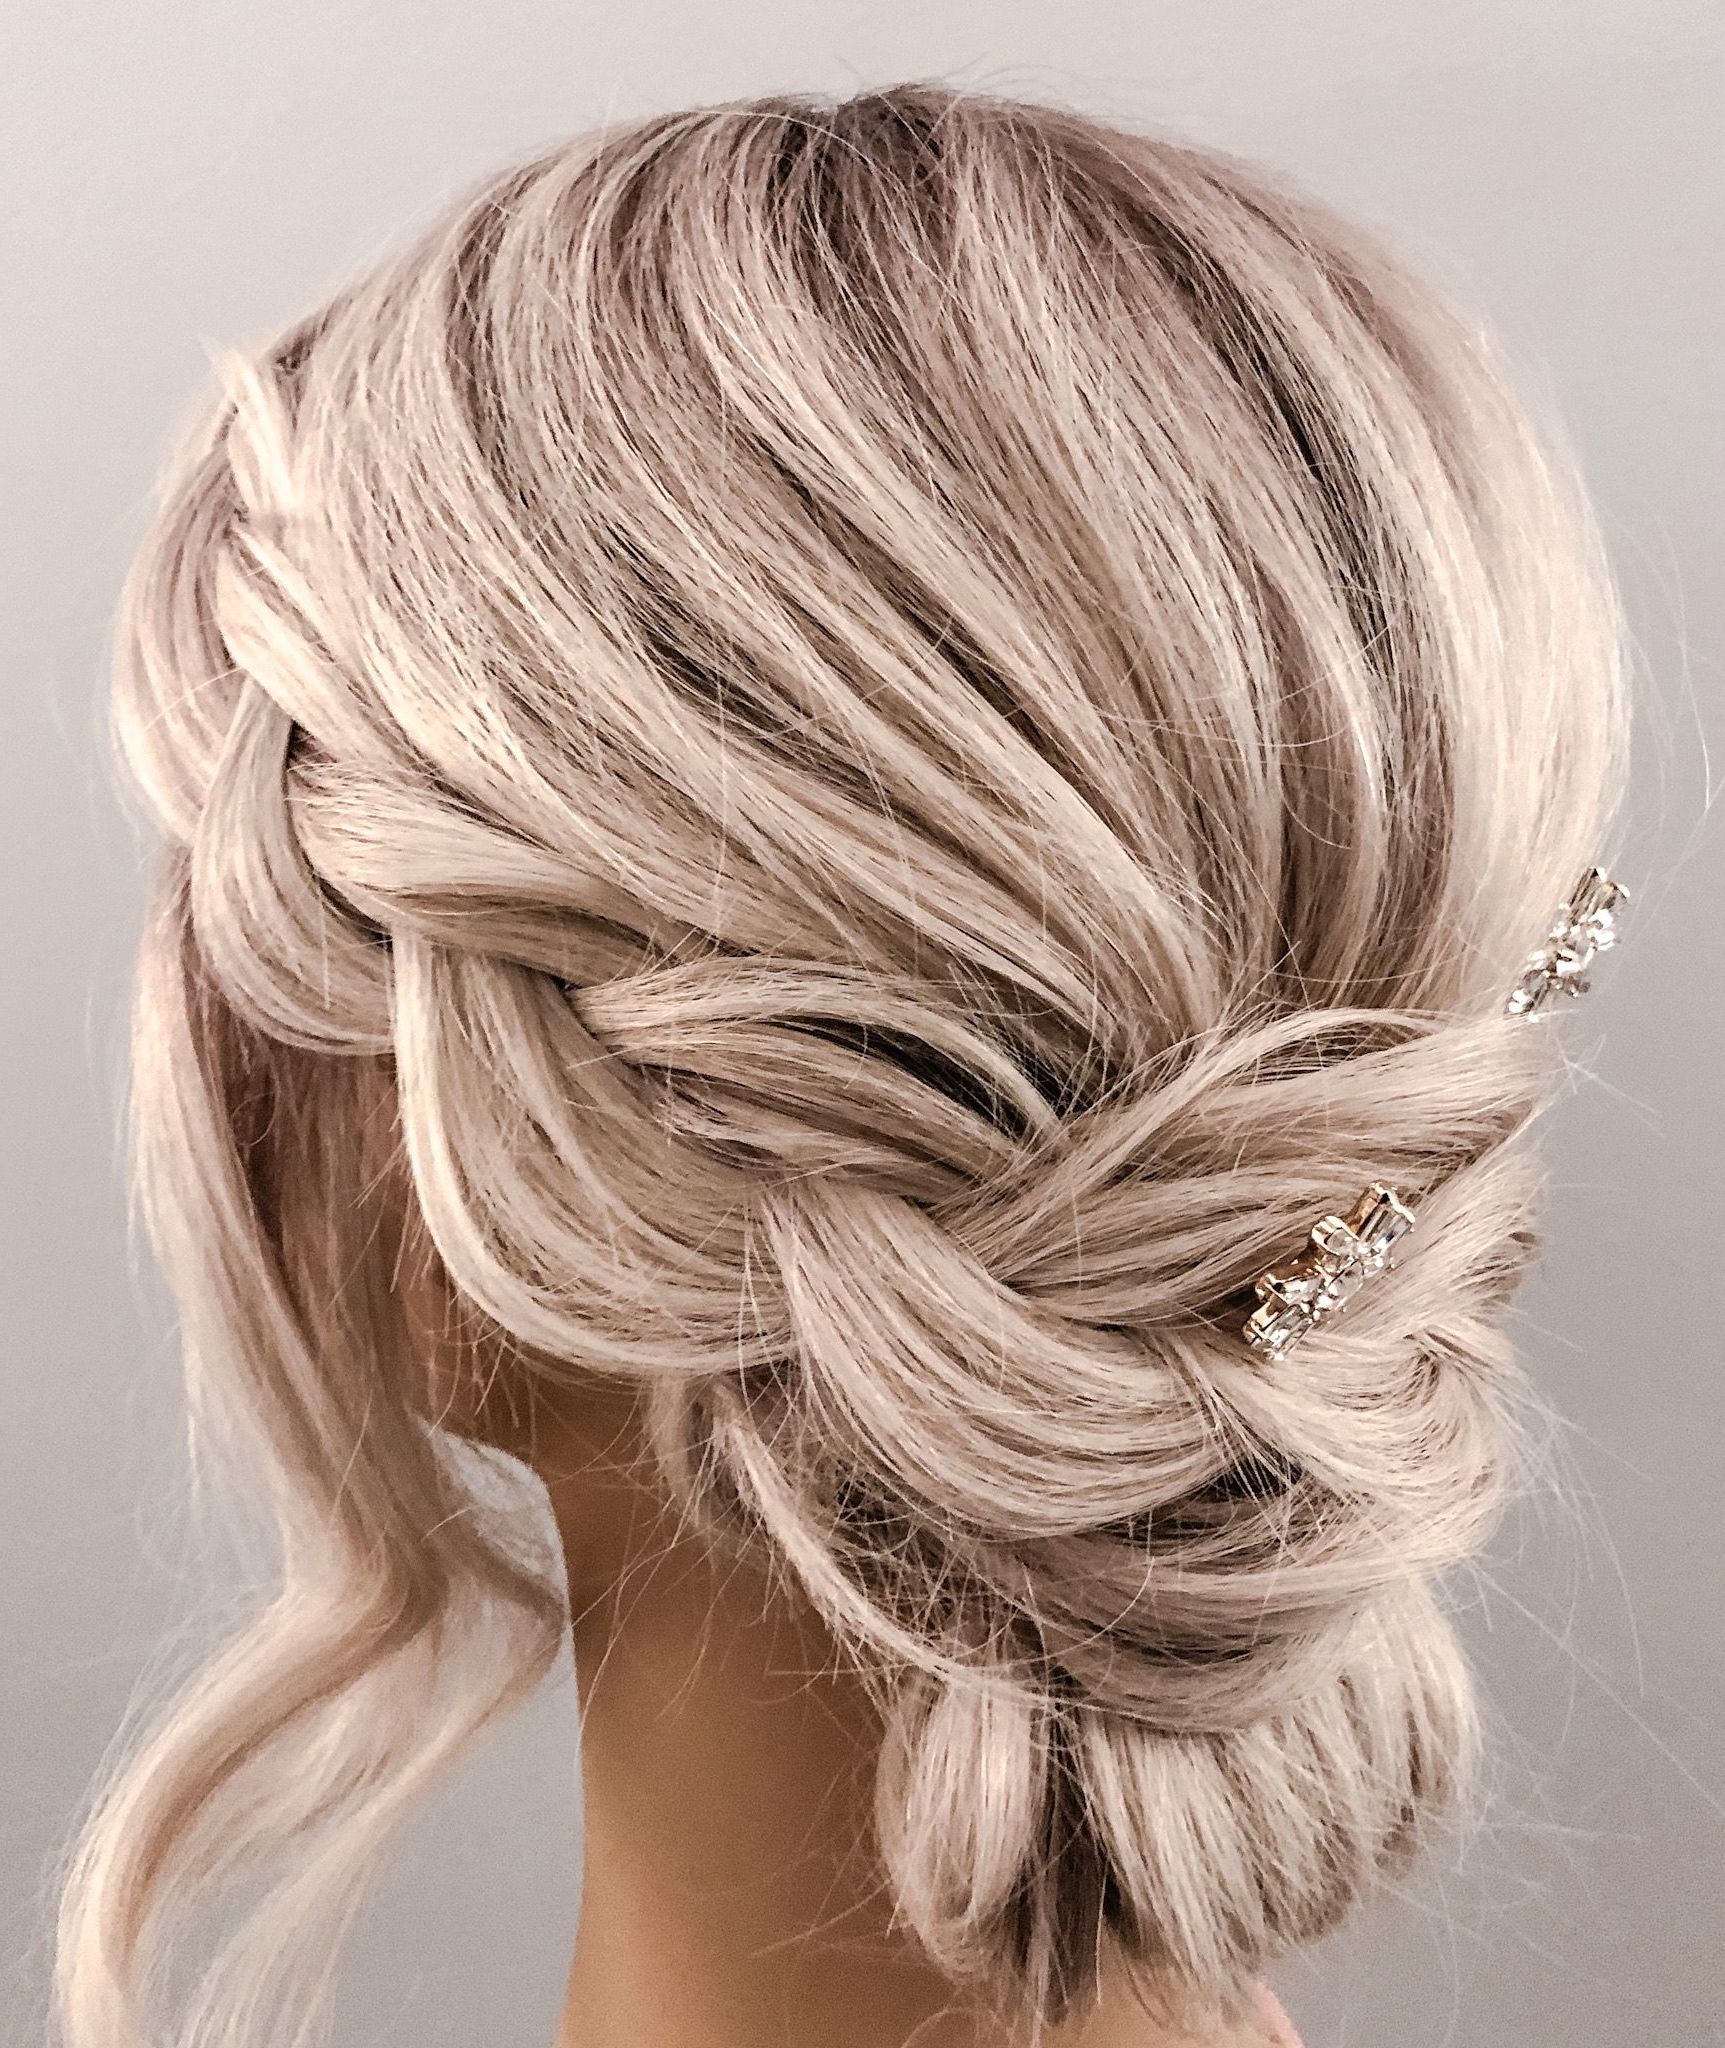 Blonde Wedding Hair, Blonde Bridal Hair, Hair Twist Styles For Recent Braided Updo For Blondes (Gallery 1 of 15)